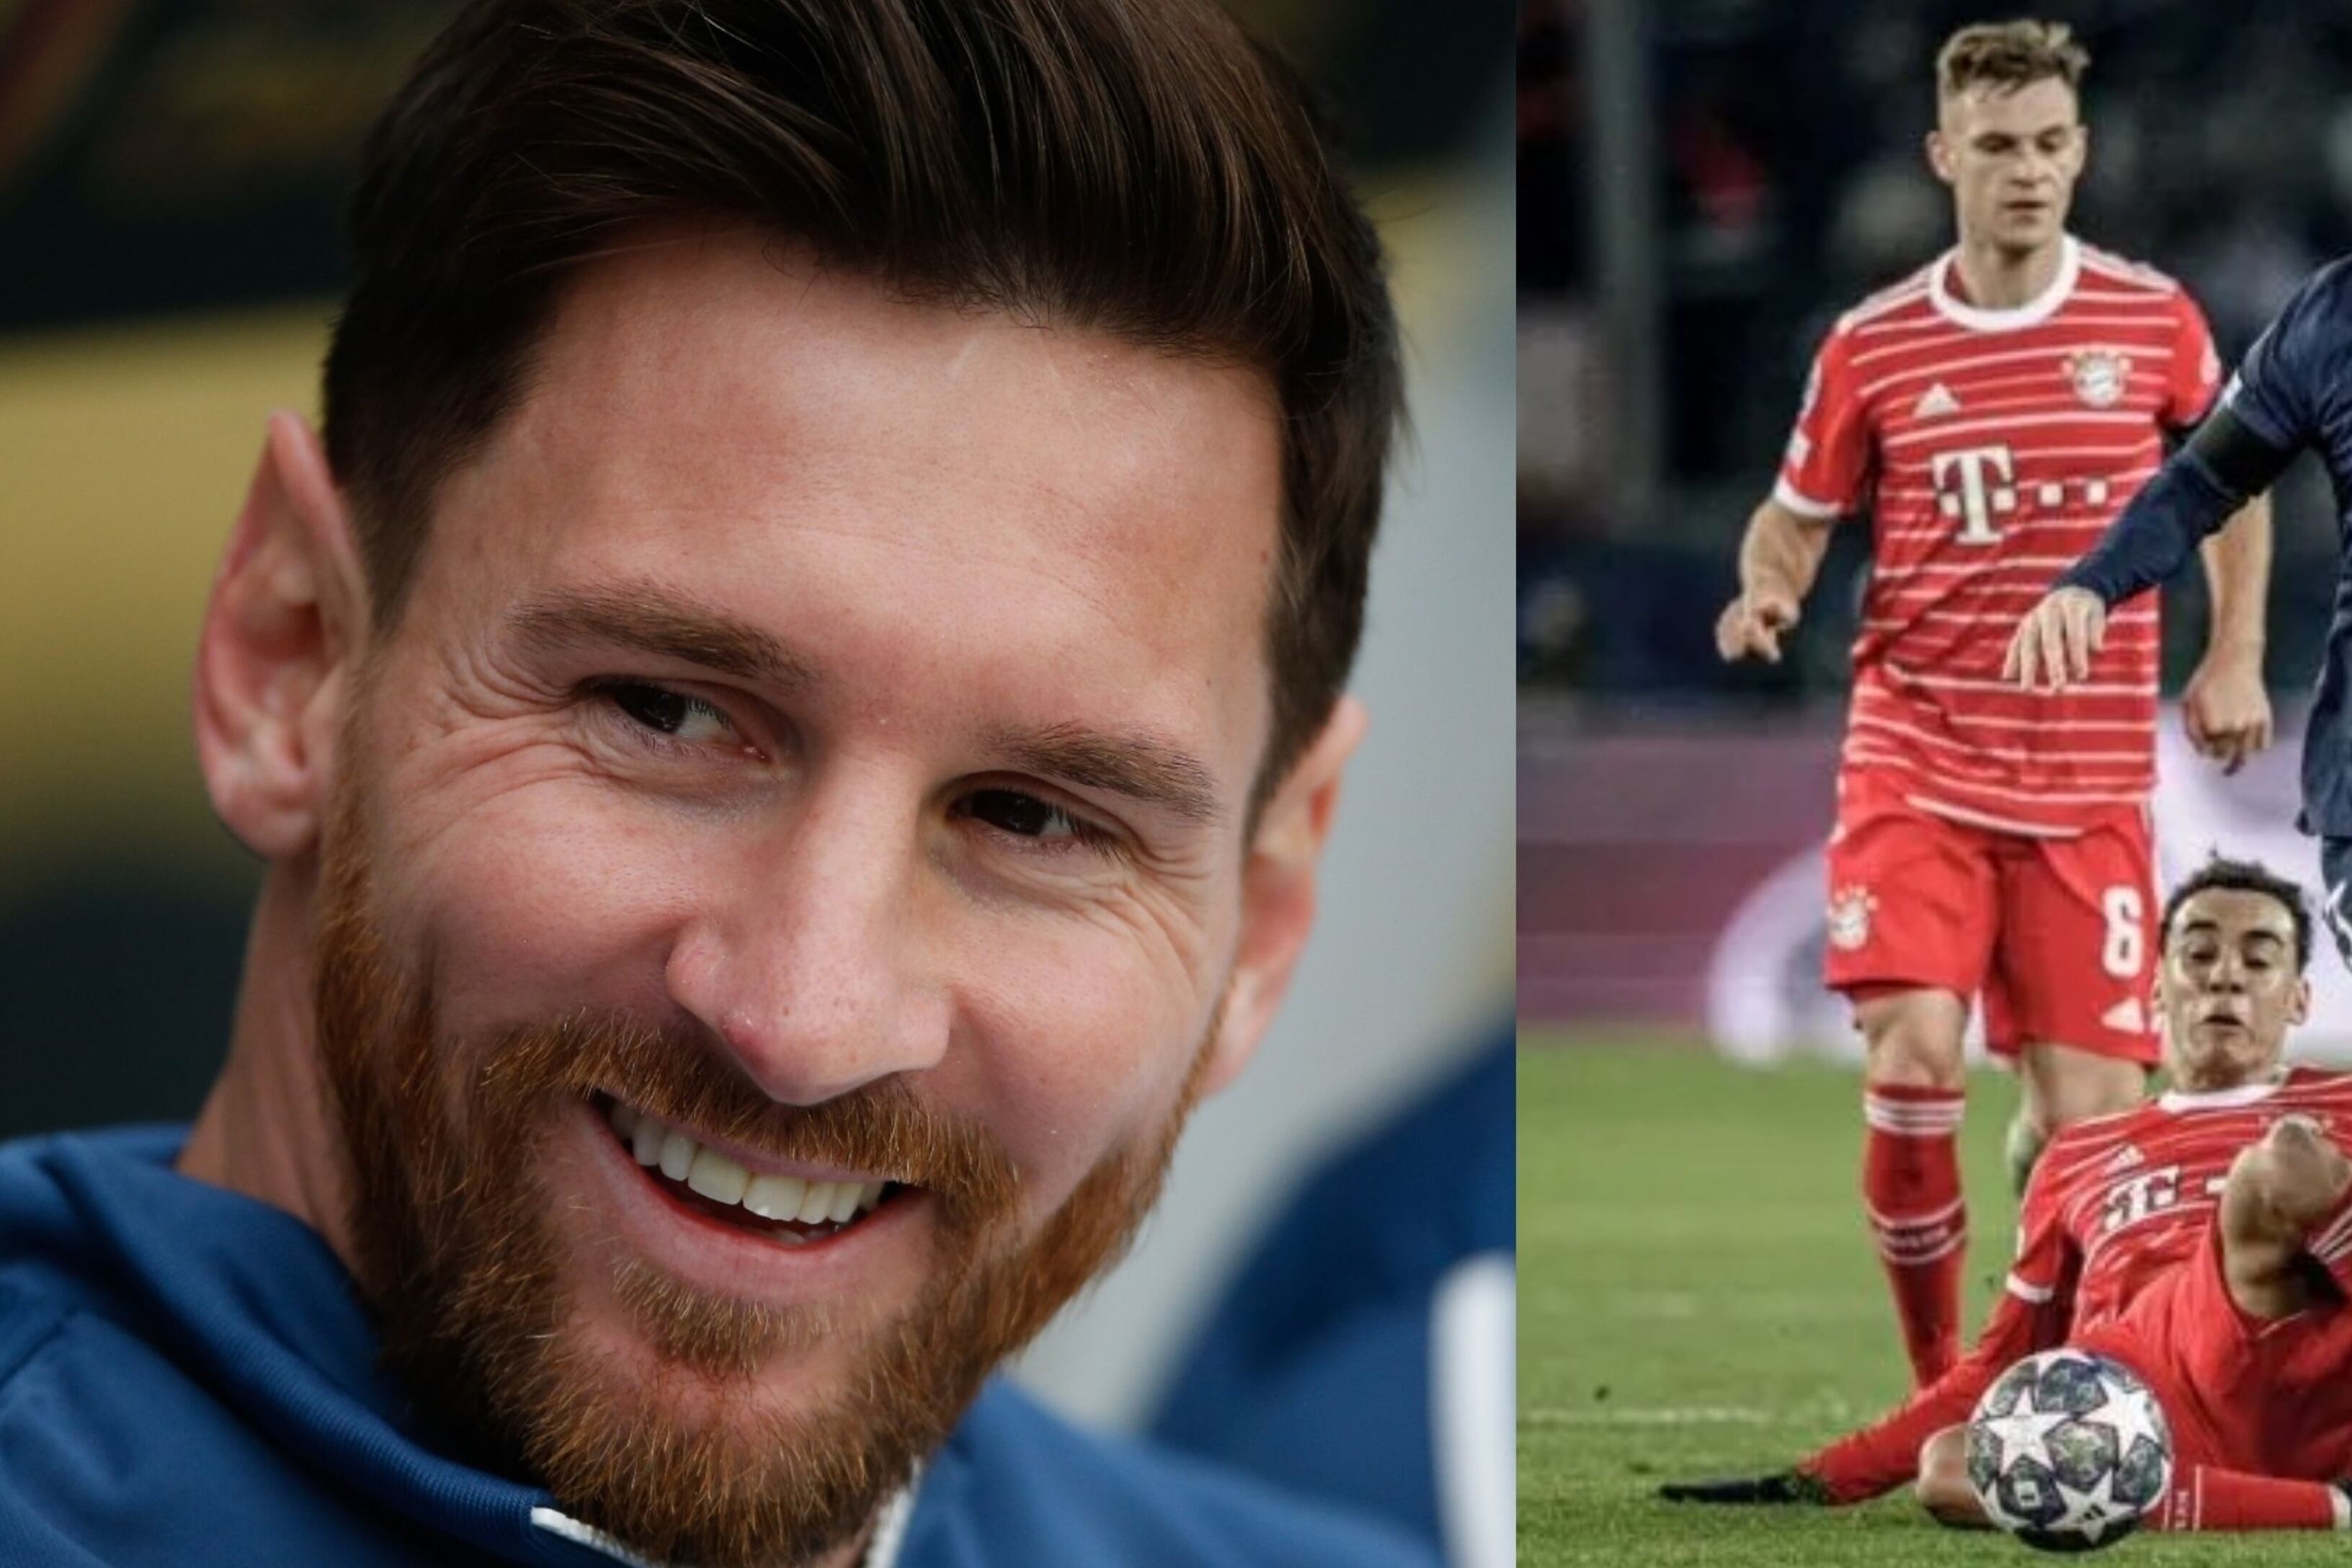 Messi's lesson to the new 19-year-old Bayern Munich pearl who believes he is his inheritor